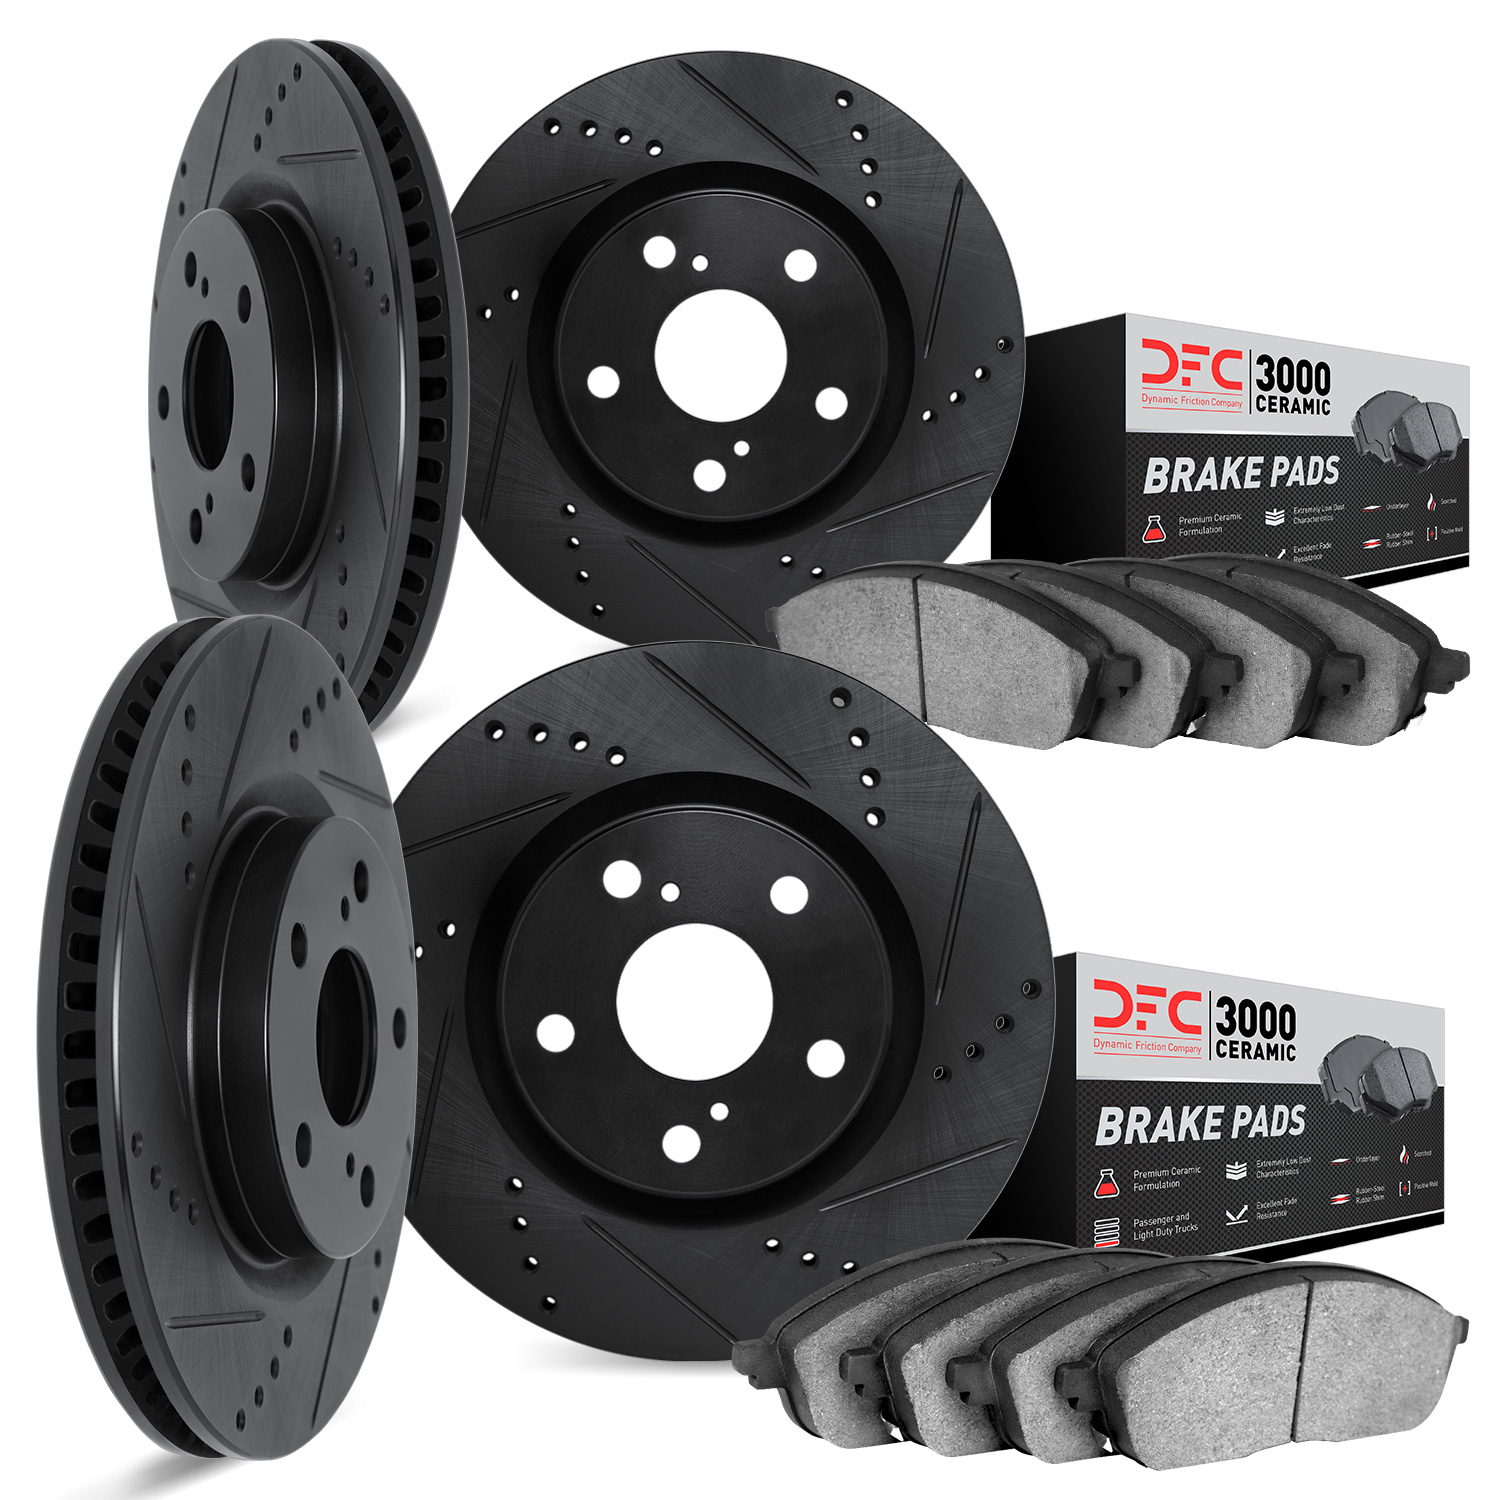 8304-47003 Drilled/Slotted Brake Rotors with 3000-Series Ceramic Brake Pads Kit [Black], 1977-1977 GM, Position: Front and Rear